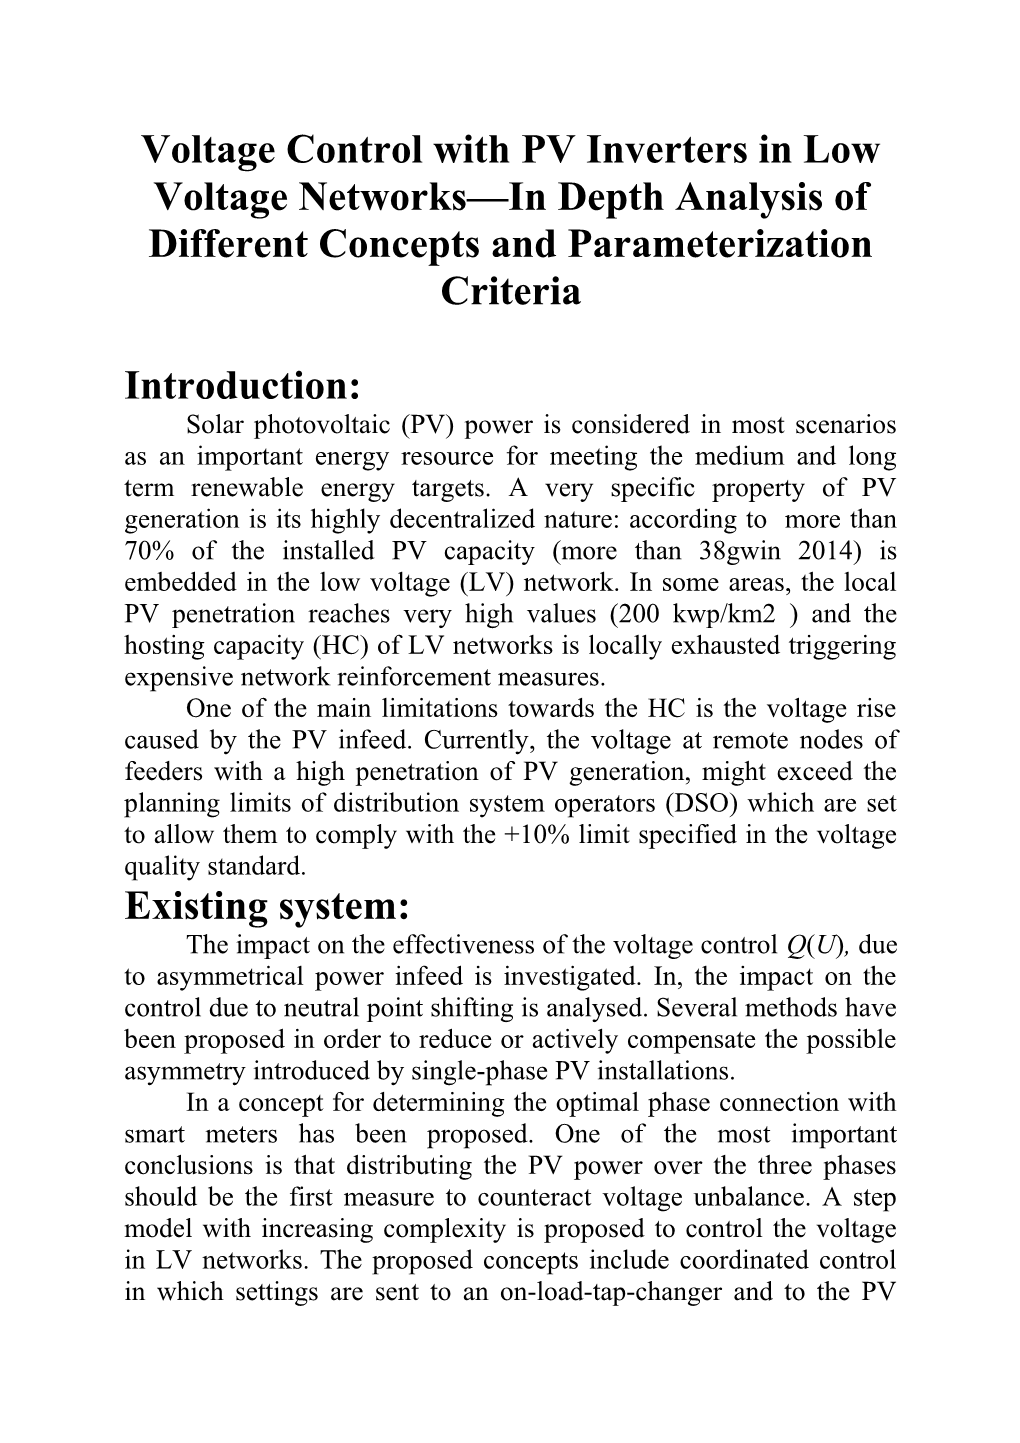 Voltage Control with PV Inverters in Low Voltage Networks in Depth Analysis of Different